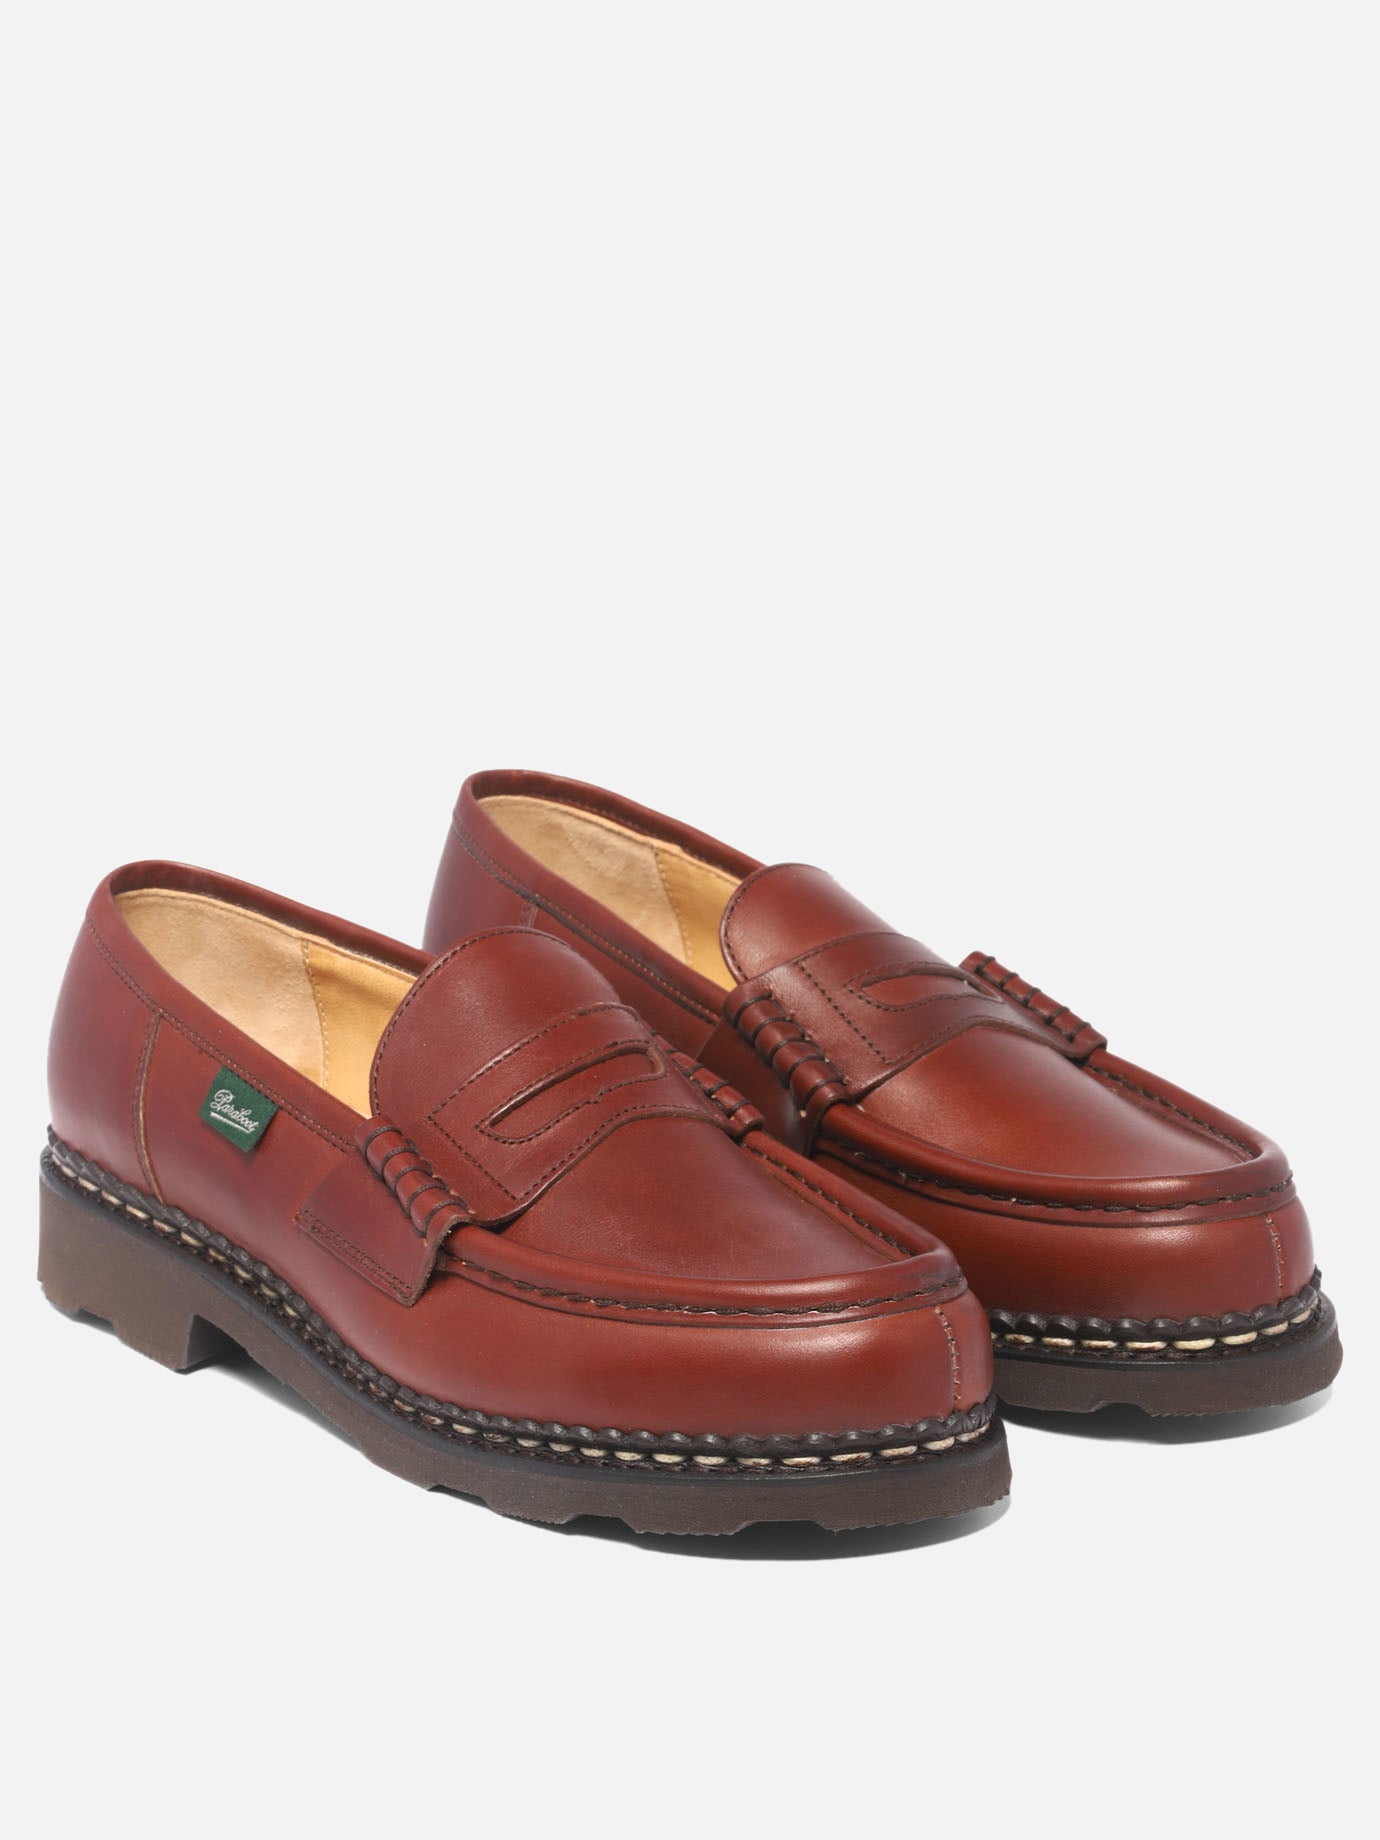 "Orsay" loafers